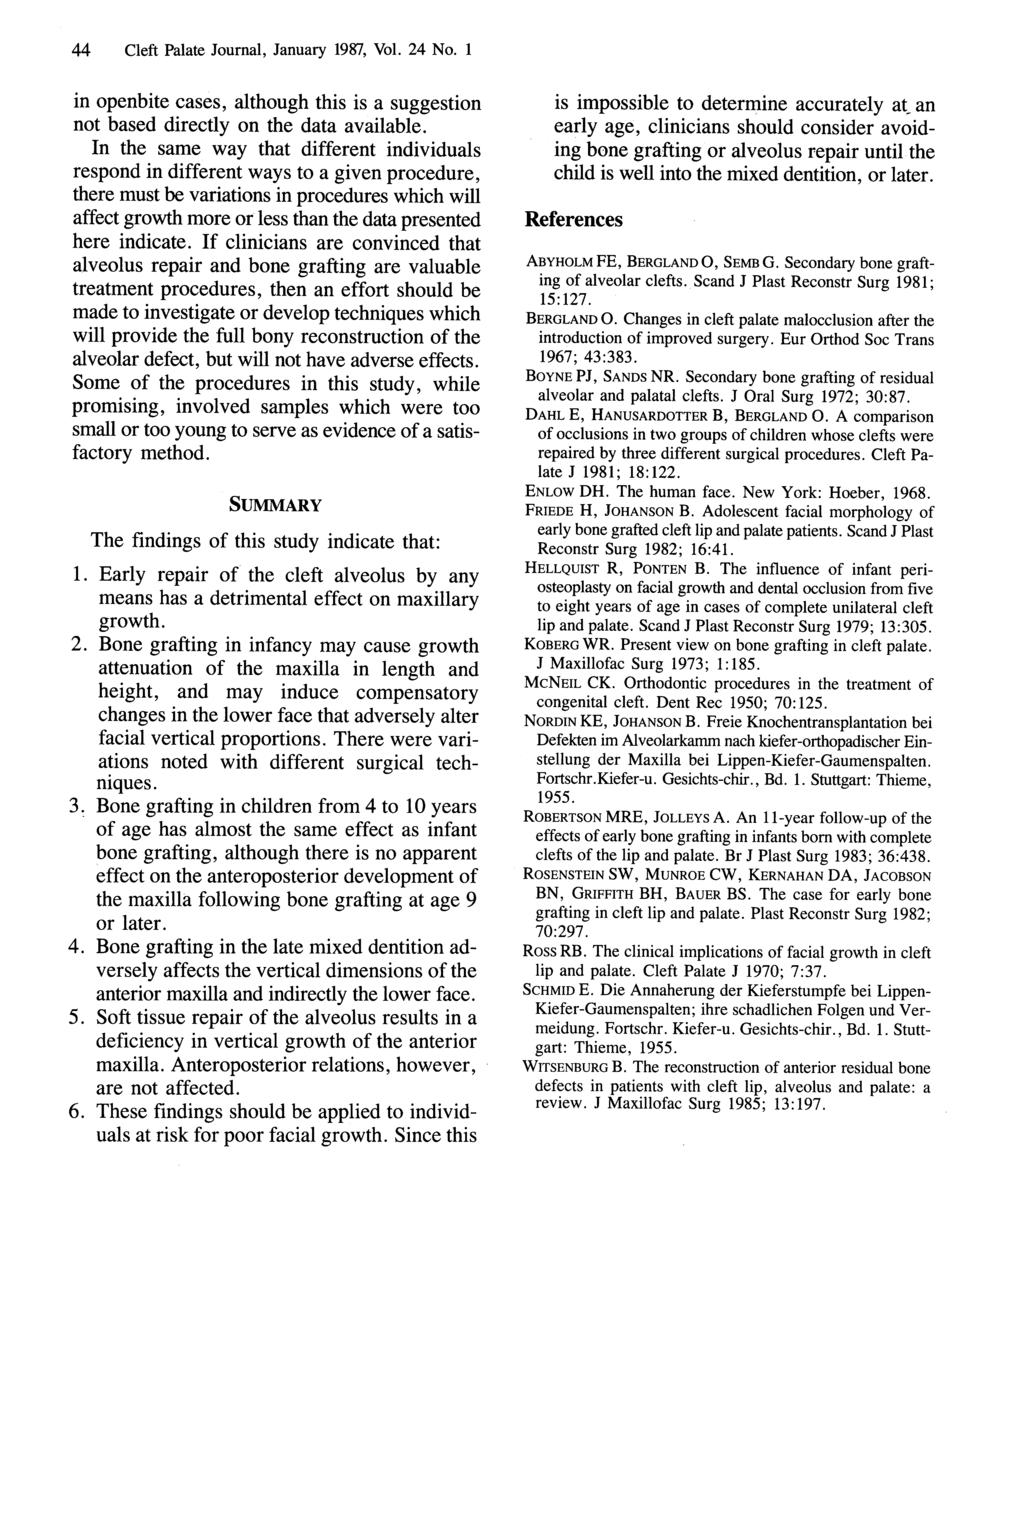 44 Cleft Palate Journal, January 1987, Vol. 24 No. 1 in openbite cases, although this is a suggestion not based directly on the data available.